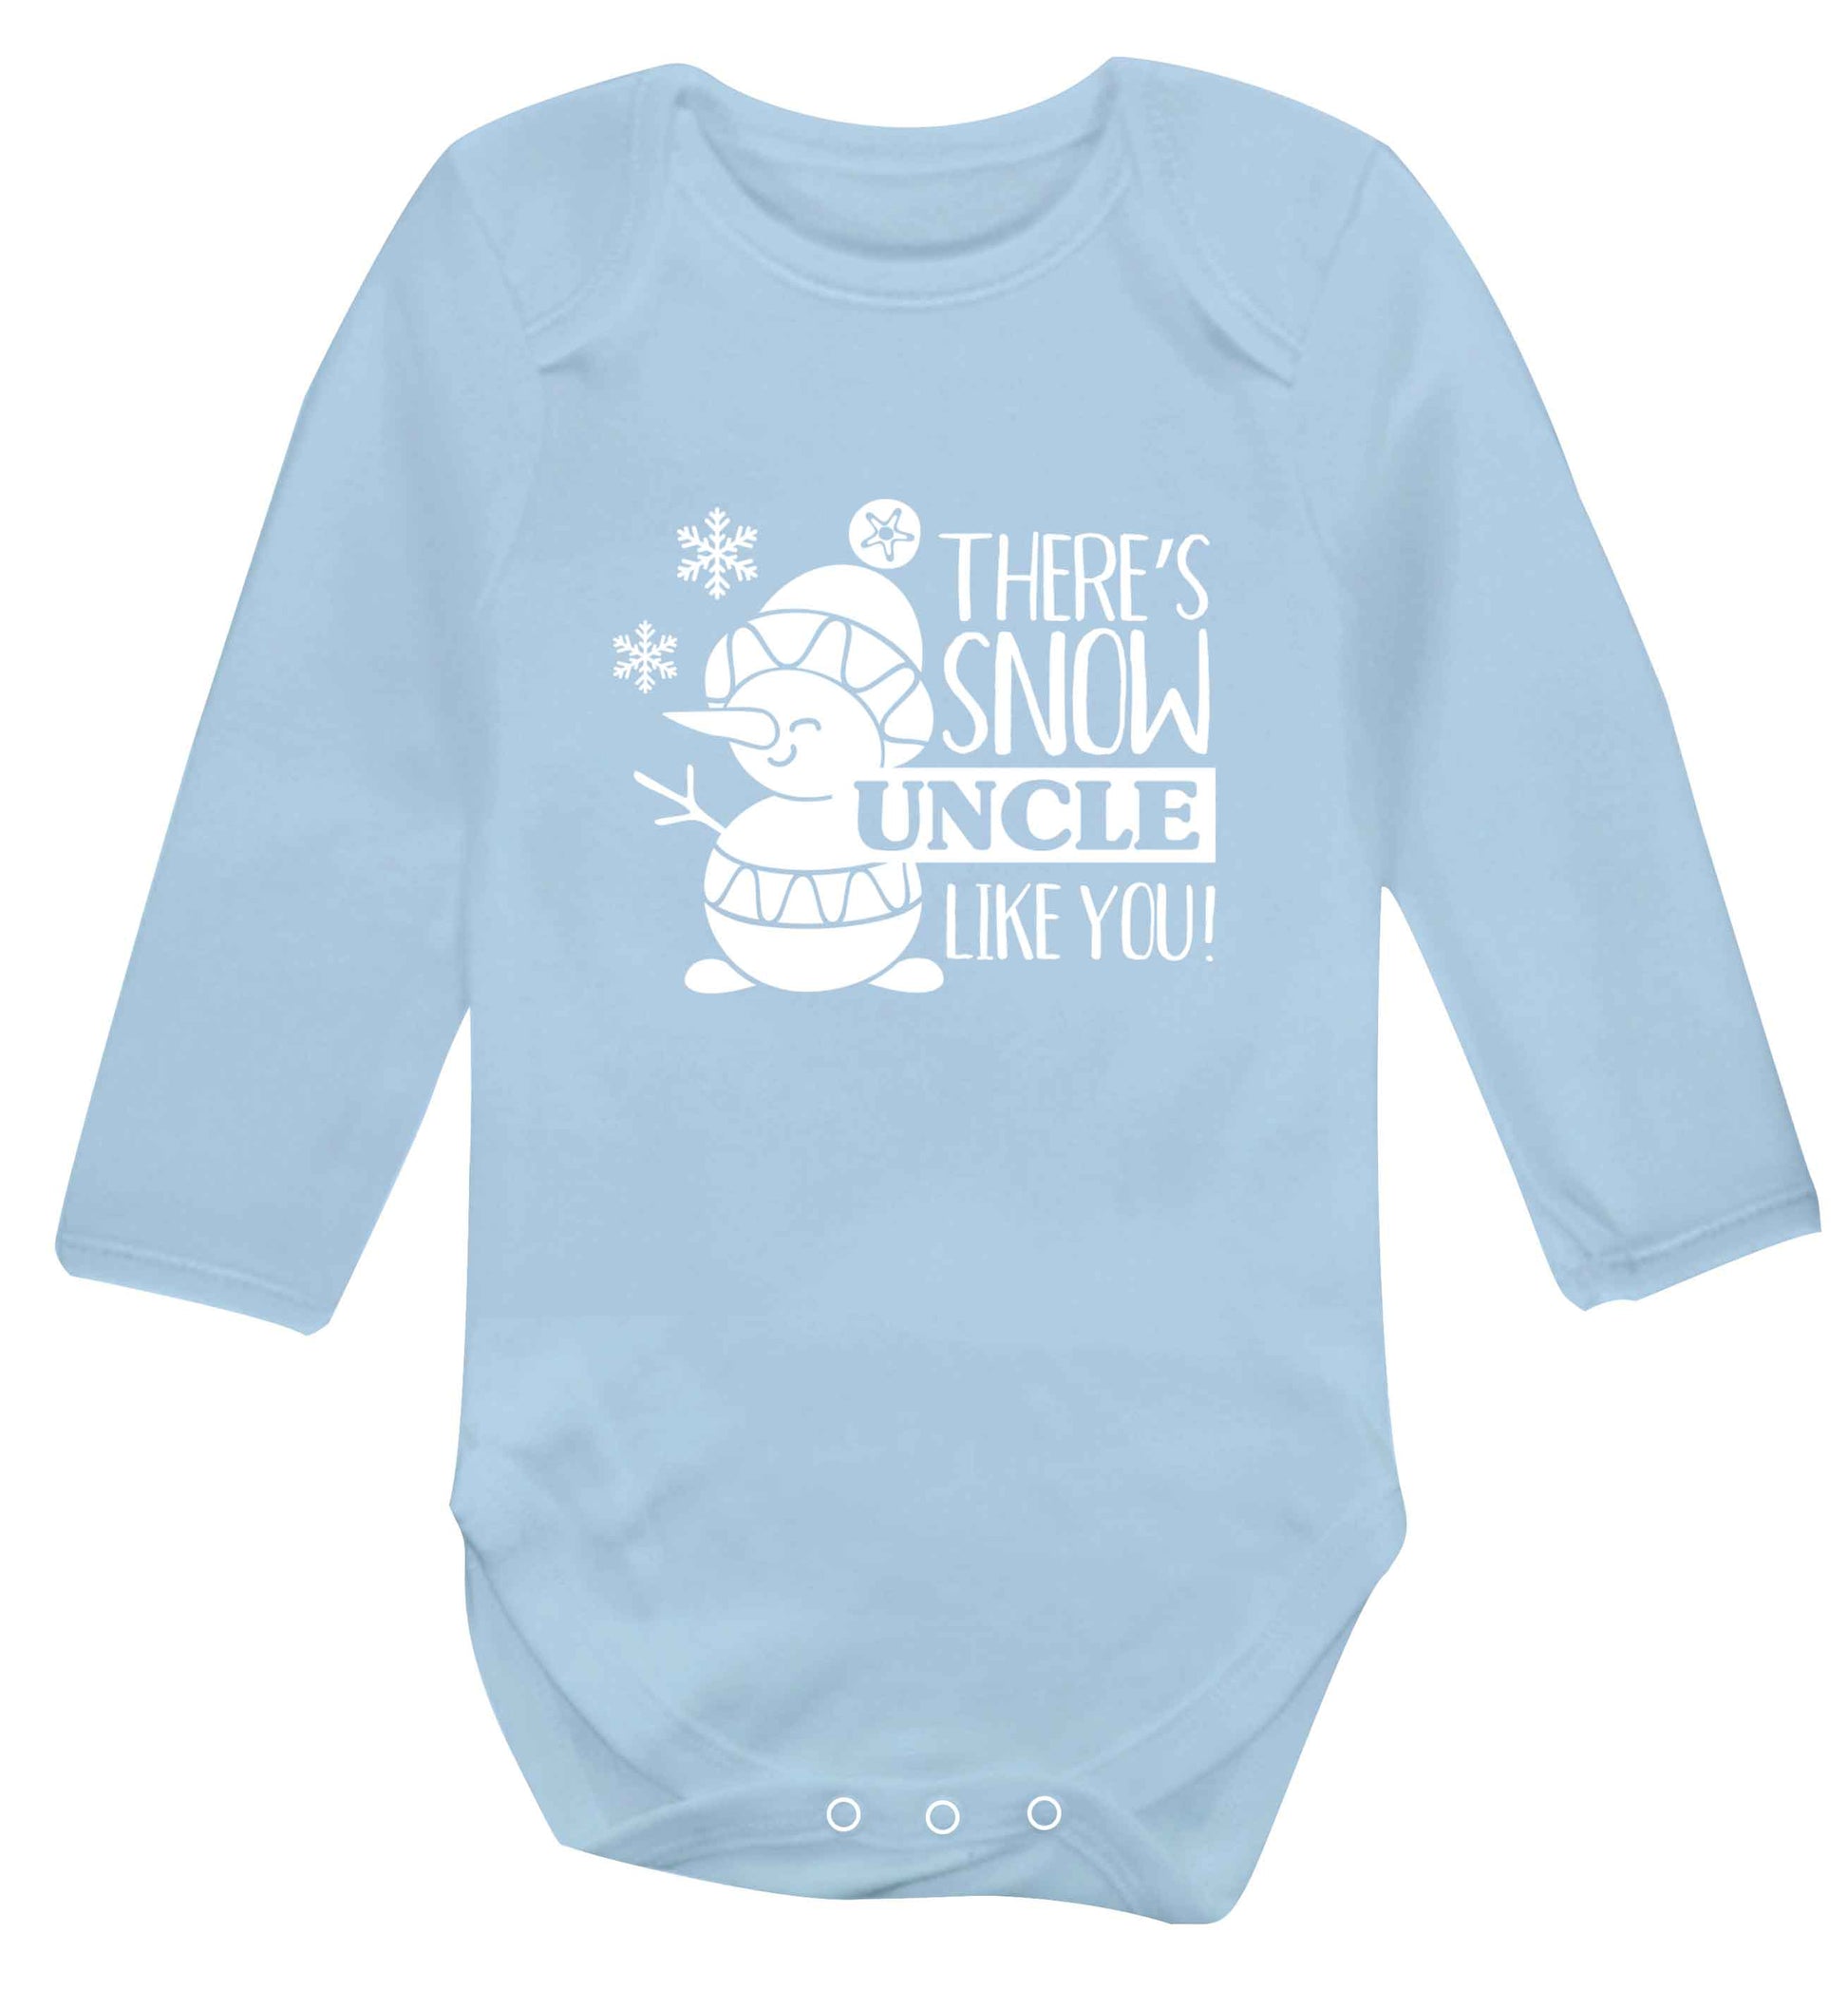 There's snow uncle like you baby vest long sleeved pale blue 6-12 months